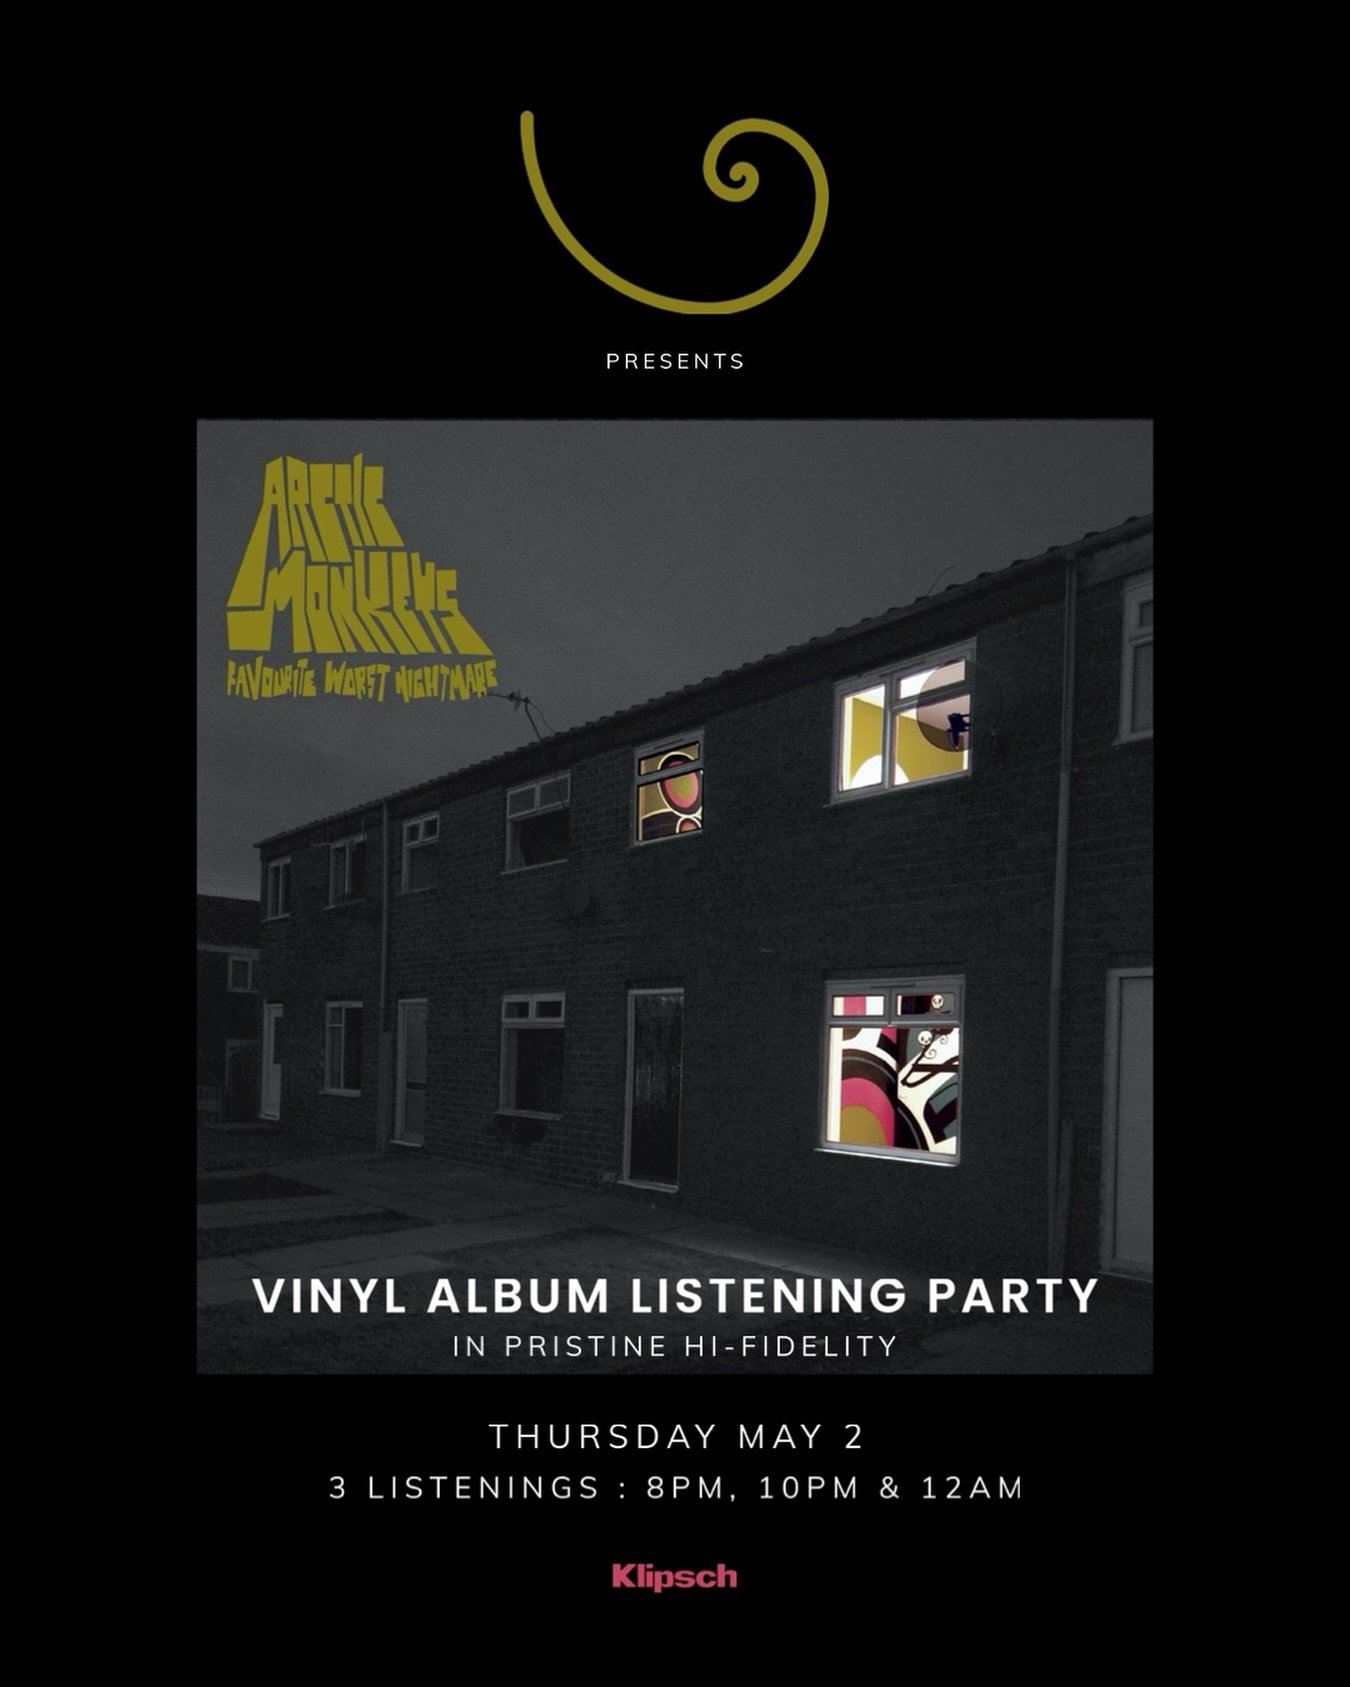 For this weeks Vinyl Album Listening Party, we present one of our all time favorites, 

Favourite Worst Nightmare by @arcticmonkeys 

Experience this incredible album in pristine Hi-Fidelity on our @klipschaudio system in the Sound Gallery this Thurs